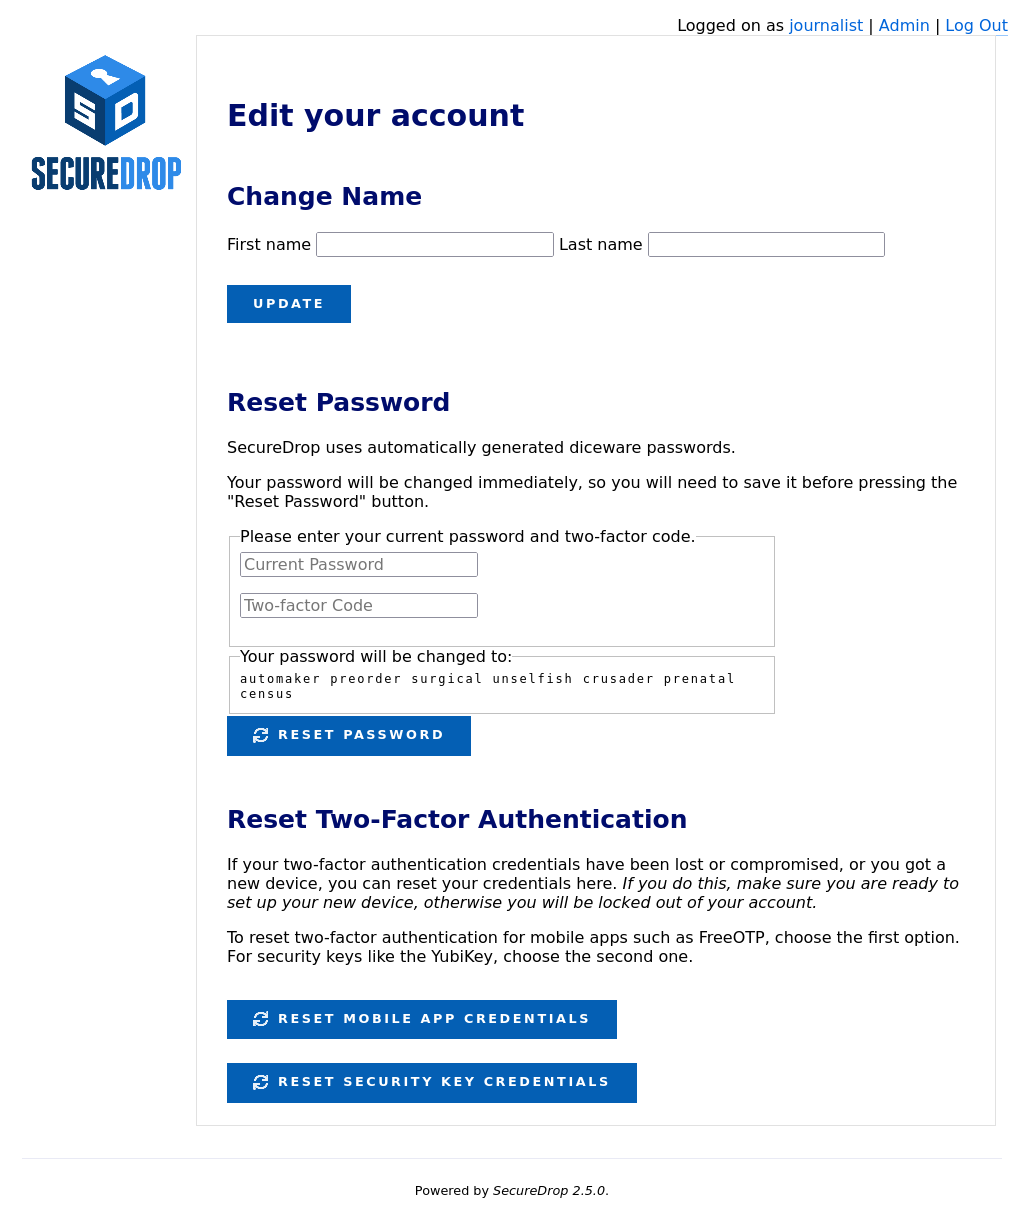 Example user profile page of a journalist. It displays forms to reset their passphrase and two-factor authentication.